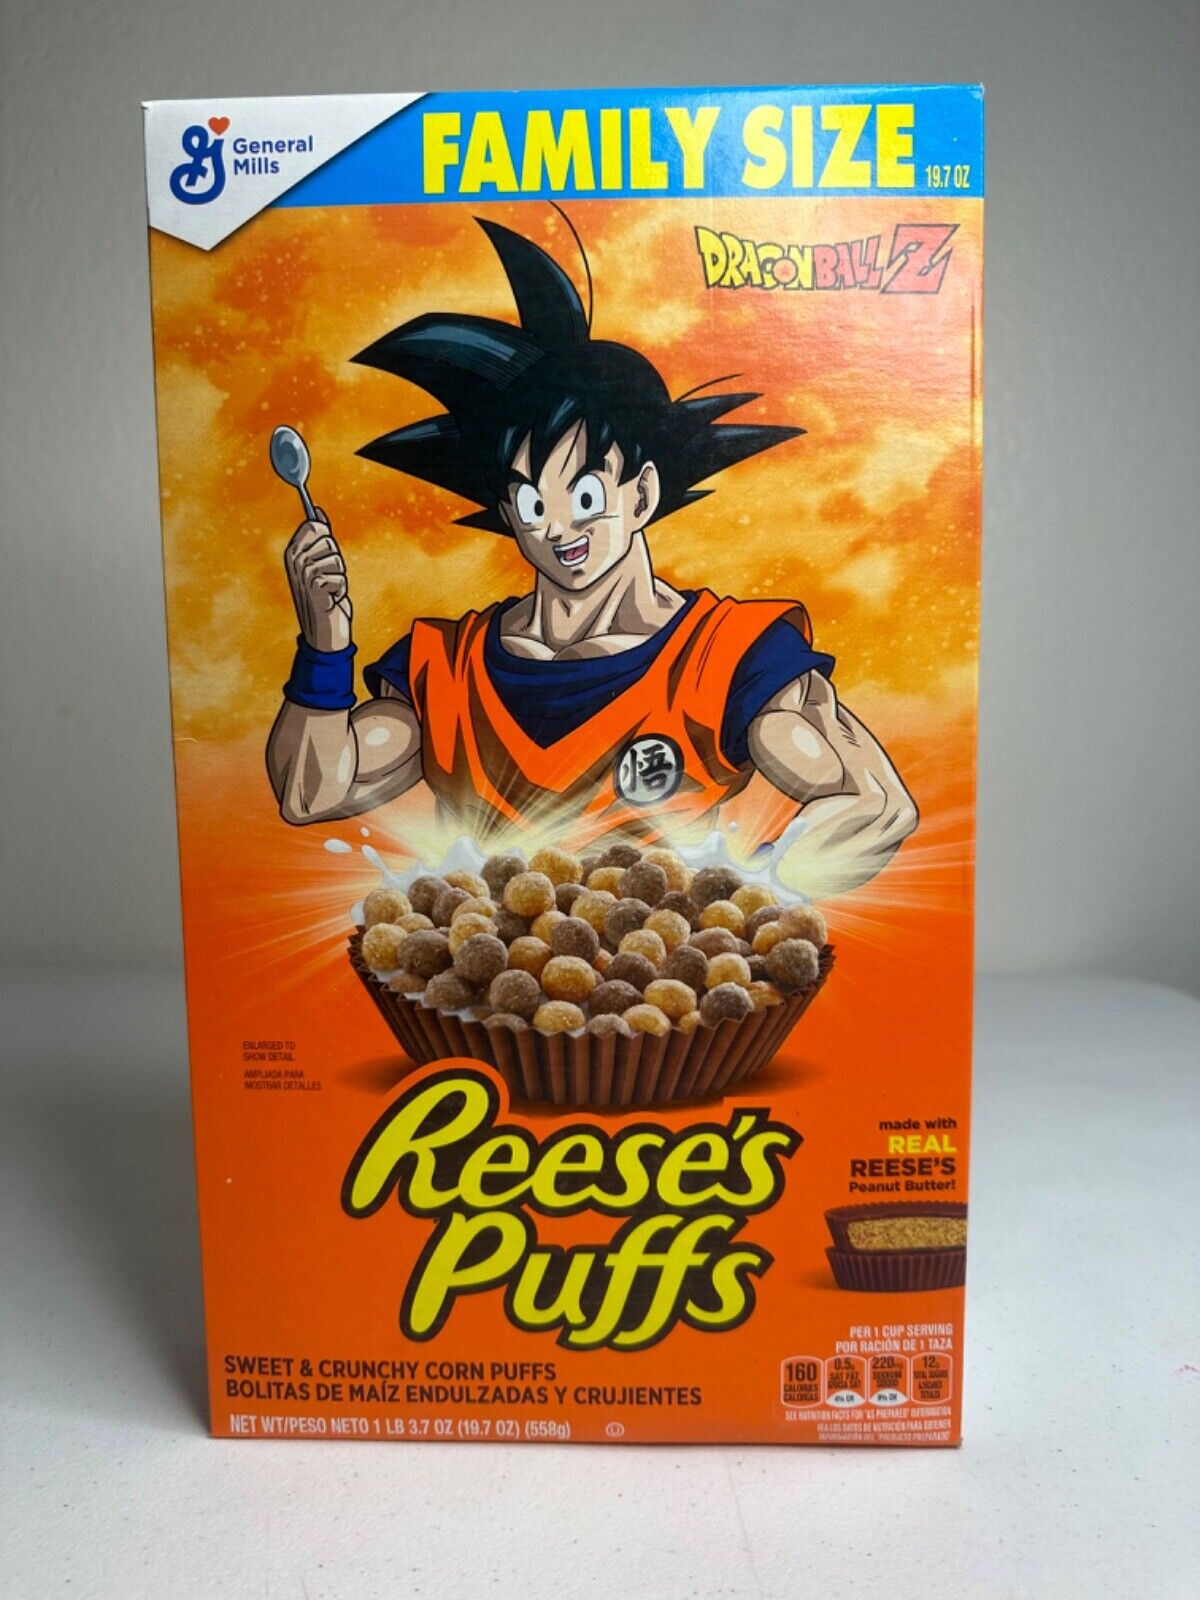 Reese's Puffs Cereal Dragonball Z Limited Edition Family Size Collectible Box